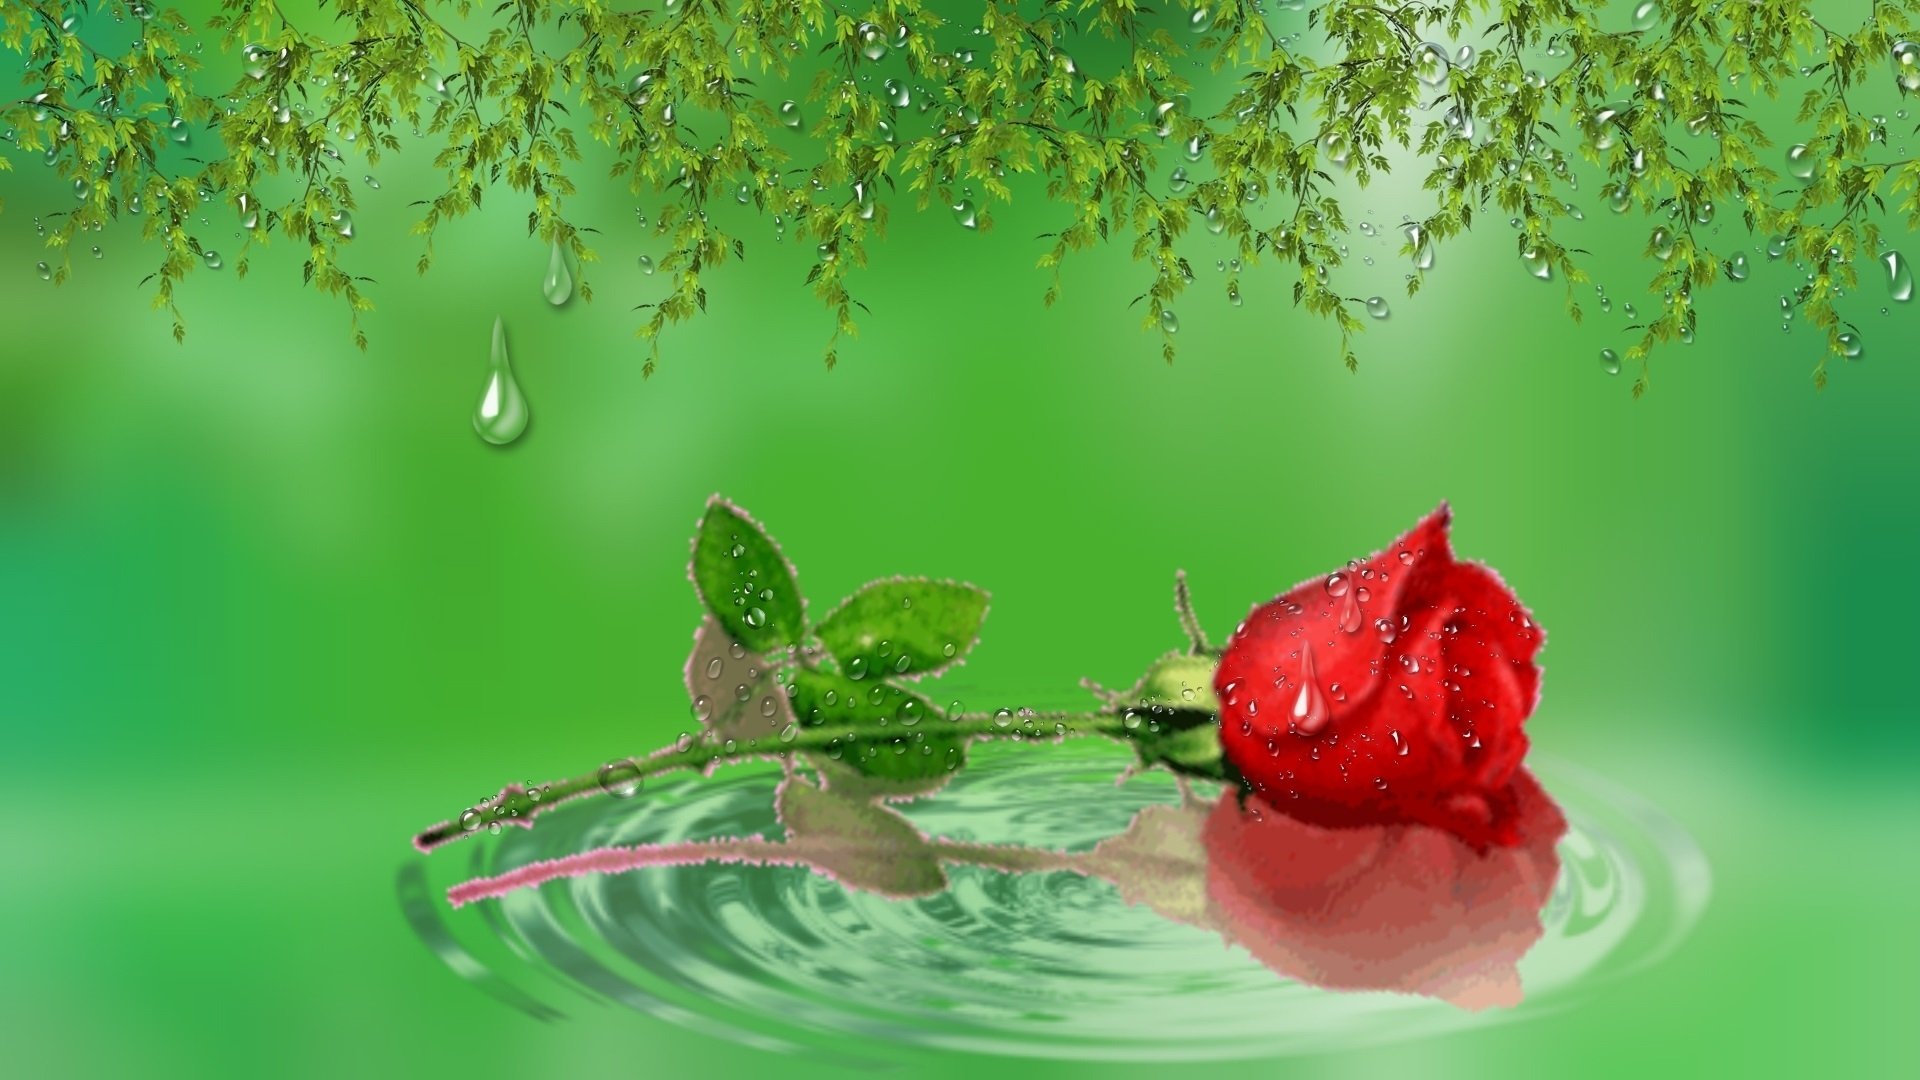 Beautiful Flower Pink Rose Green Leaves Reflection In Water Wallpaper Hd   Wallpapers13com